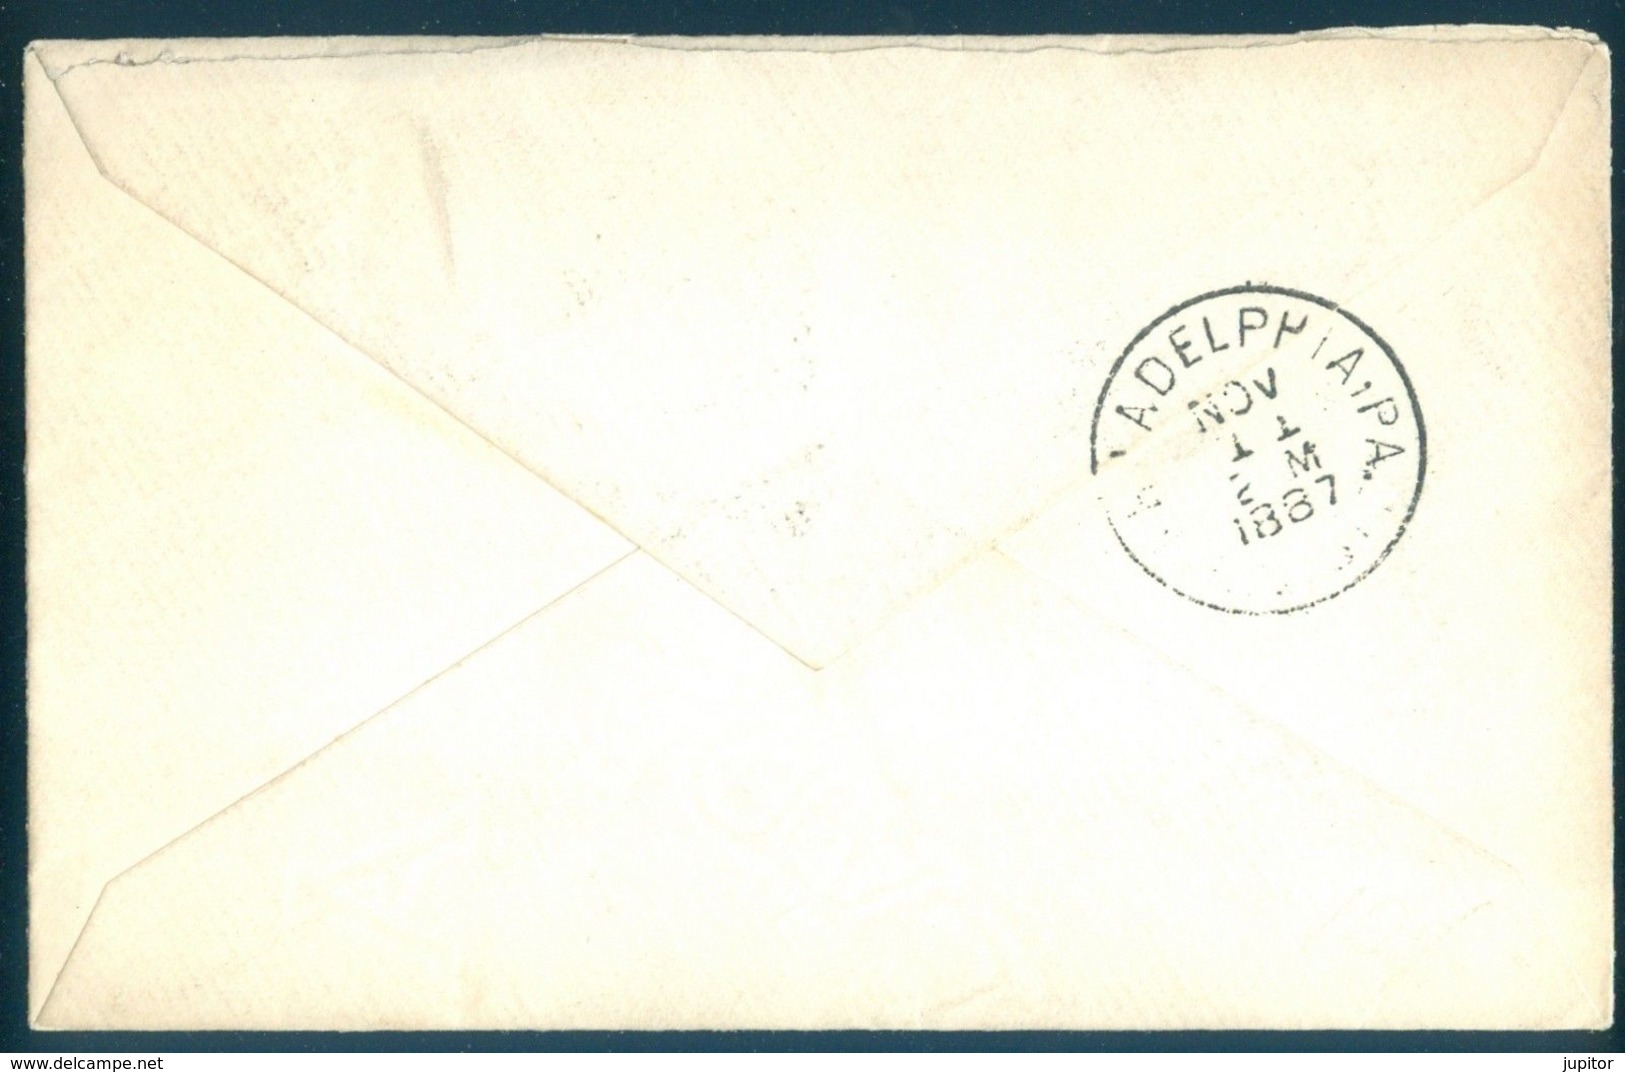 USA 1887 Cover Swarthmore Delaware To Bellefonte Philadelphia PA. CANCELS - Covers & Documents